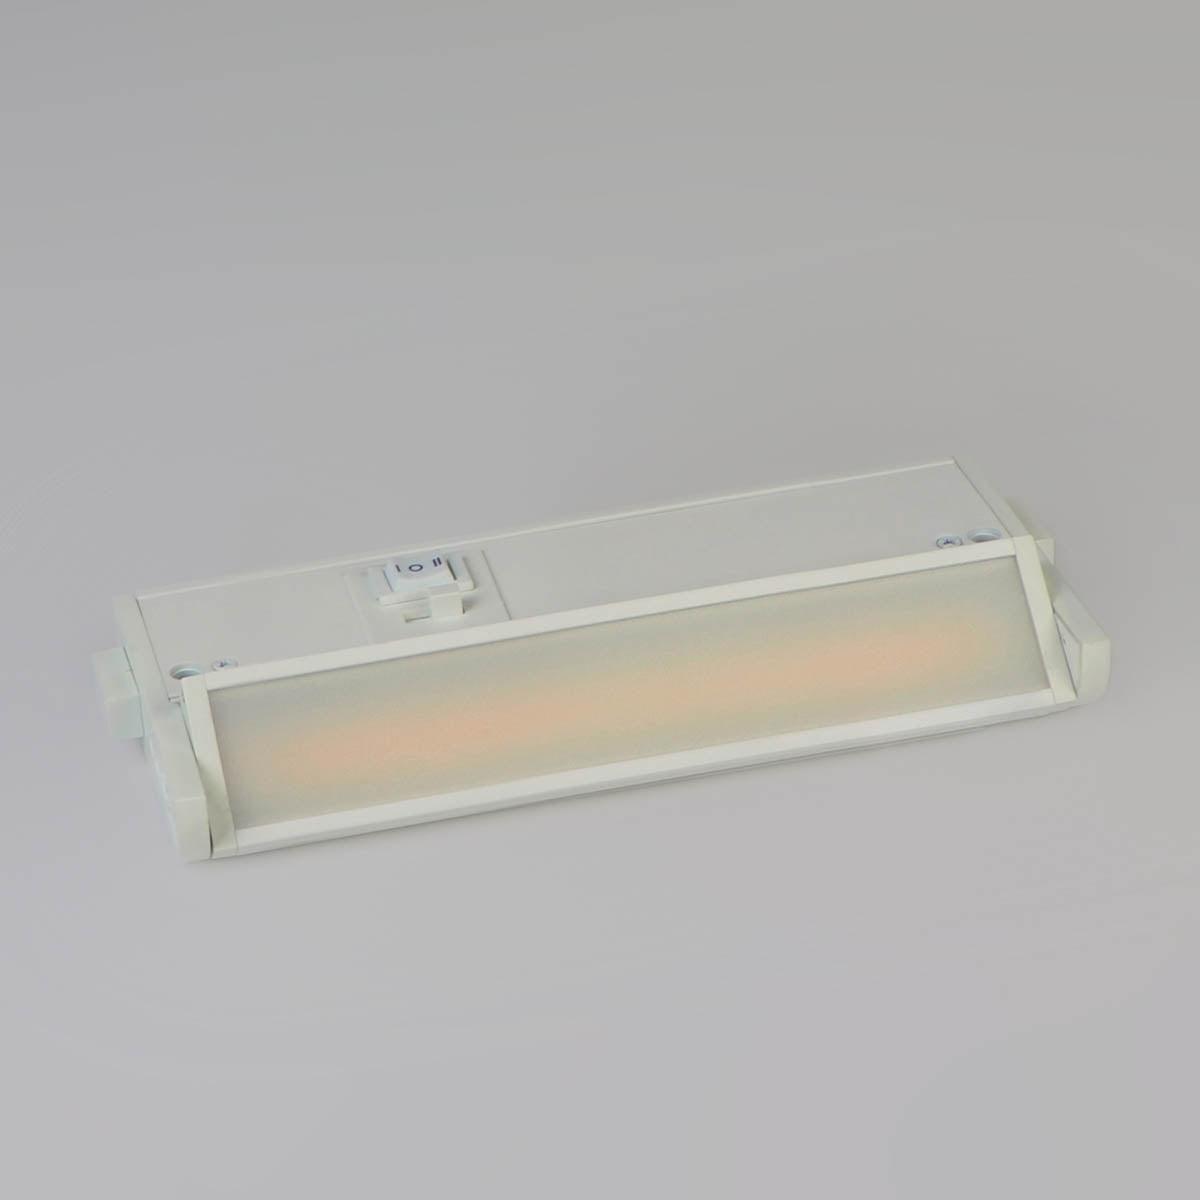 CounterMax 5K 36 Inch Under Cabinet LED Light with Patent gimbals, 2220 Lumens, Linkable, CCT Selectable 2700K to 5000K, 120V